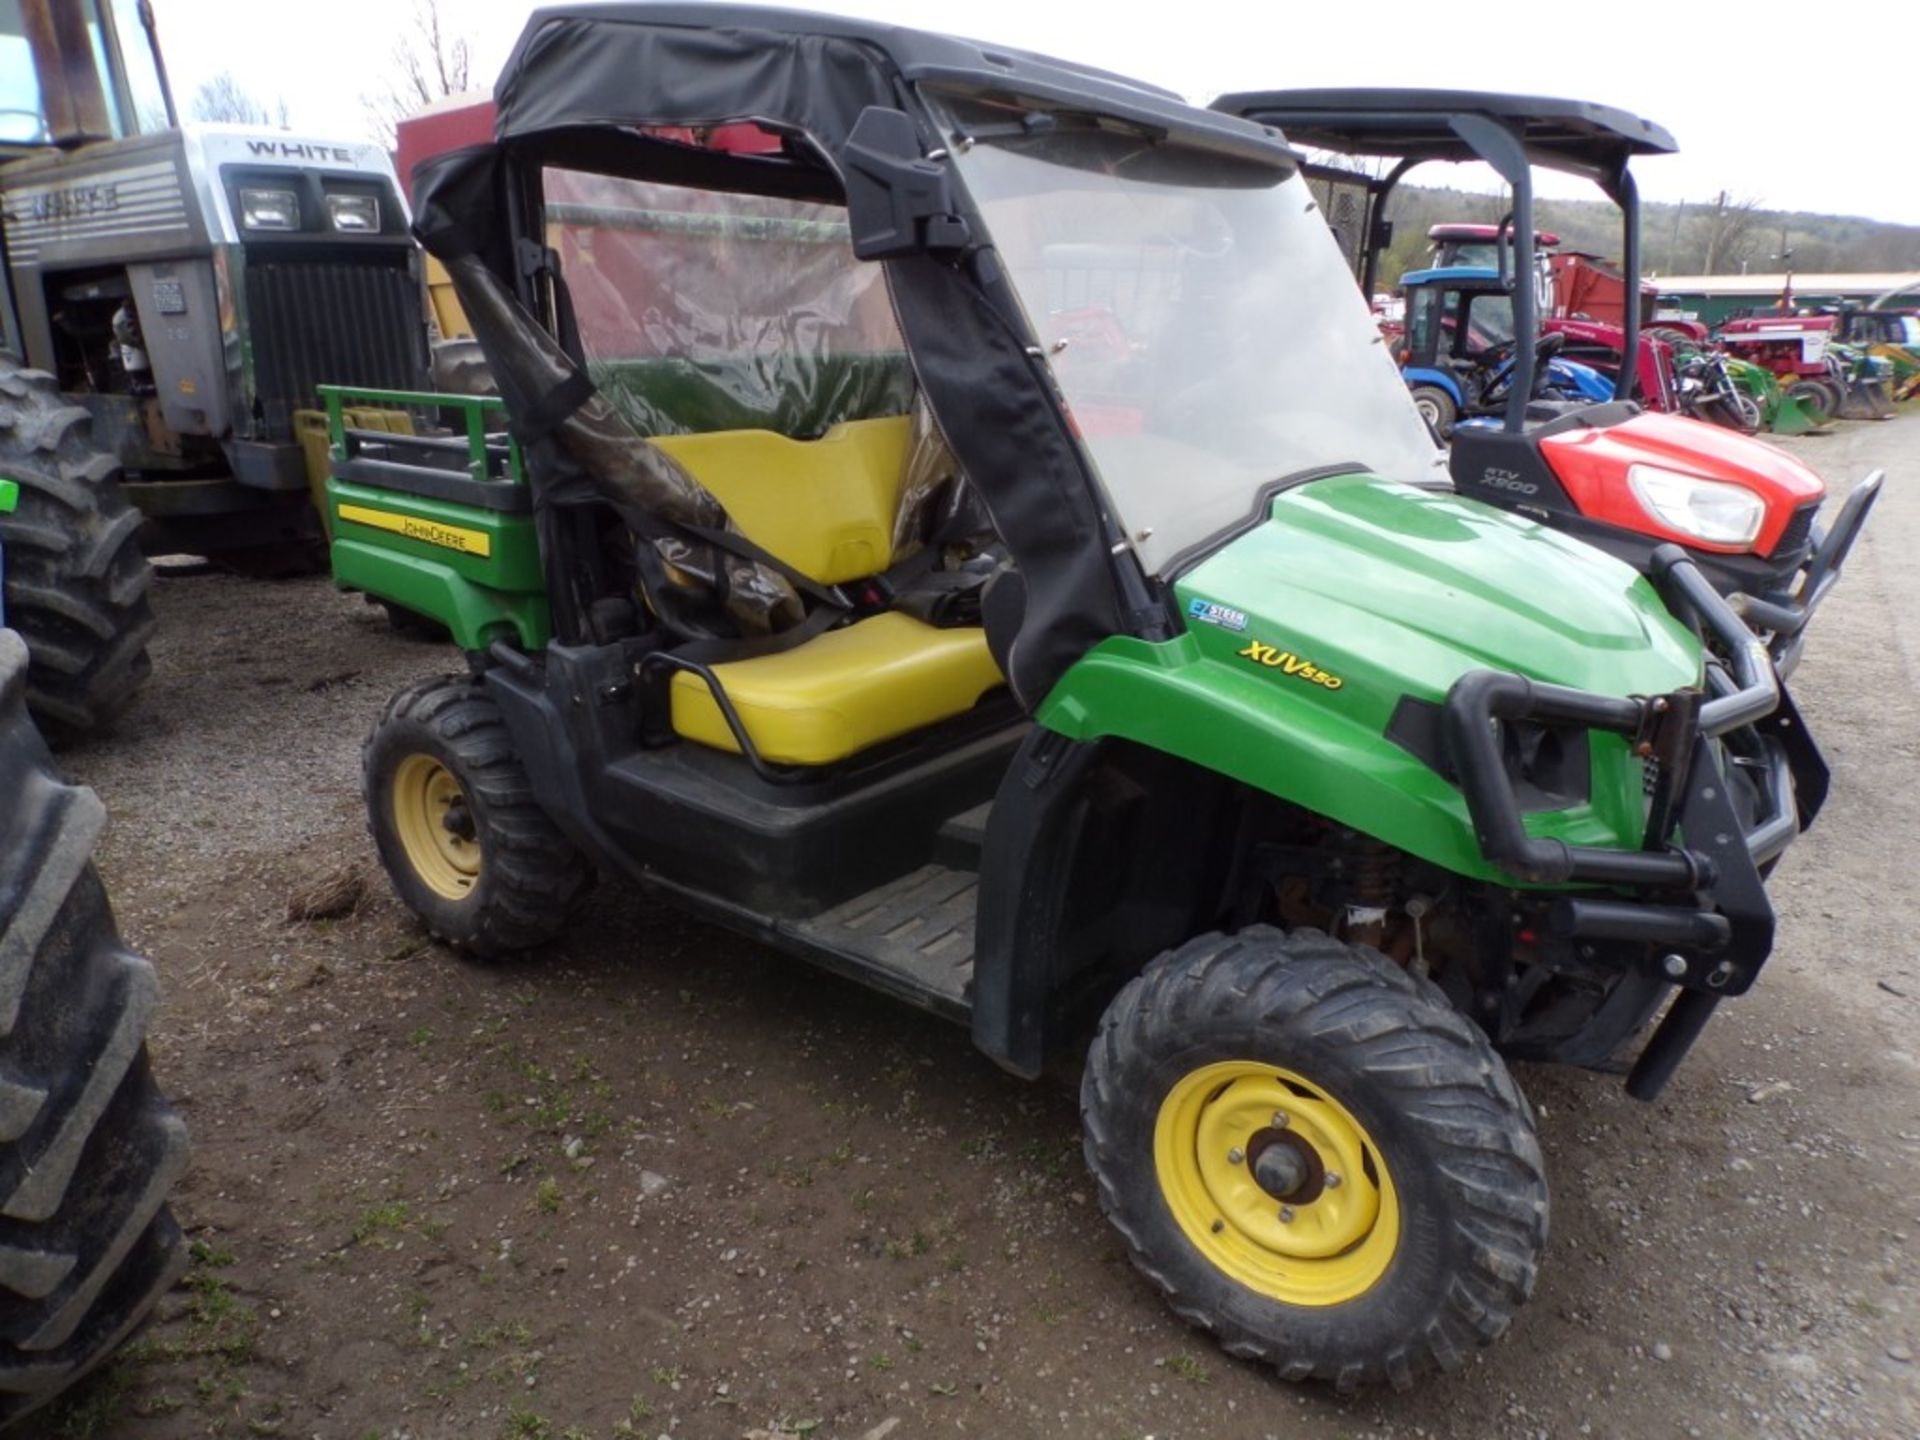 John Deere XUV-550 UTV with Canopy and Windshield, 4 WD, 395 Hrs., Super Nice, Ser.# 004802 (4365) - Image 3 of 6